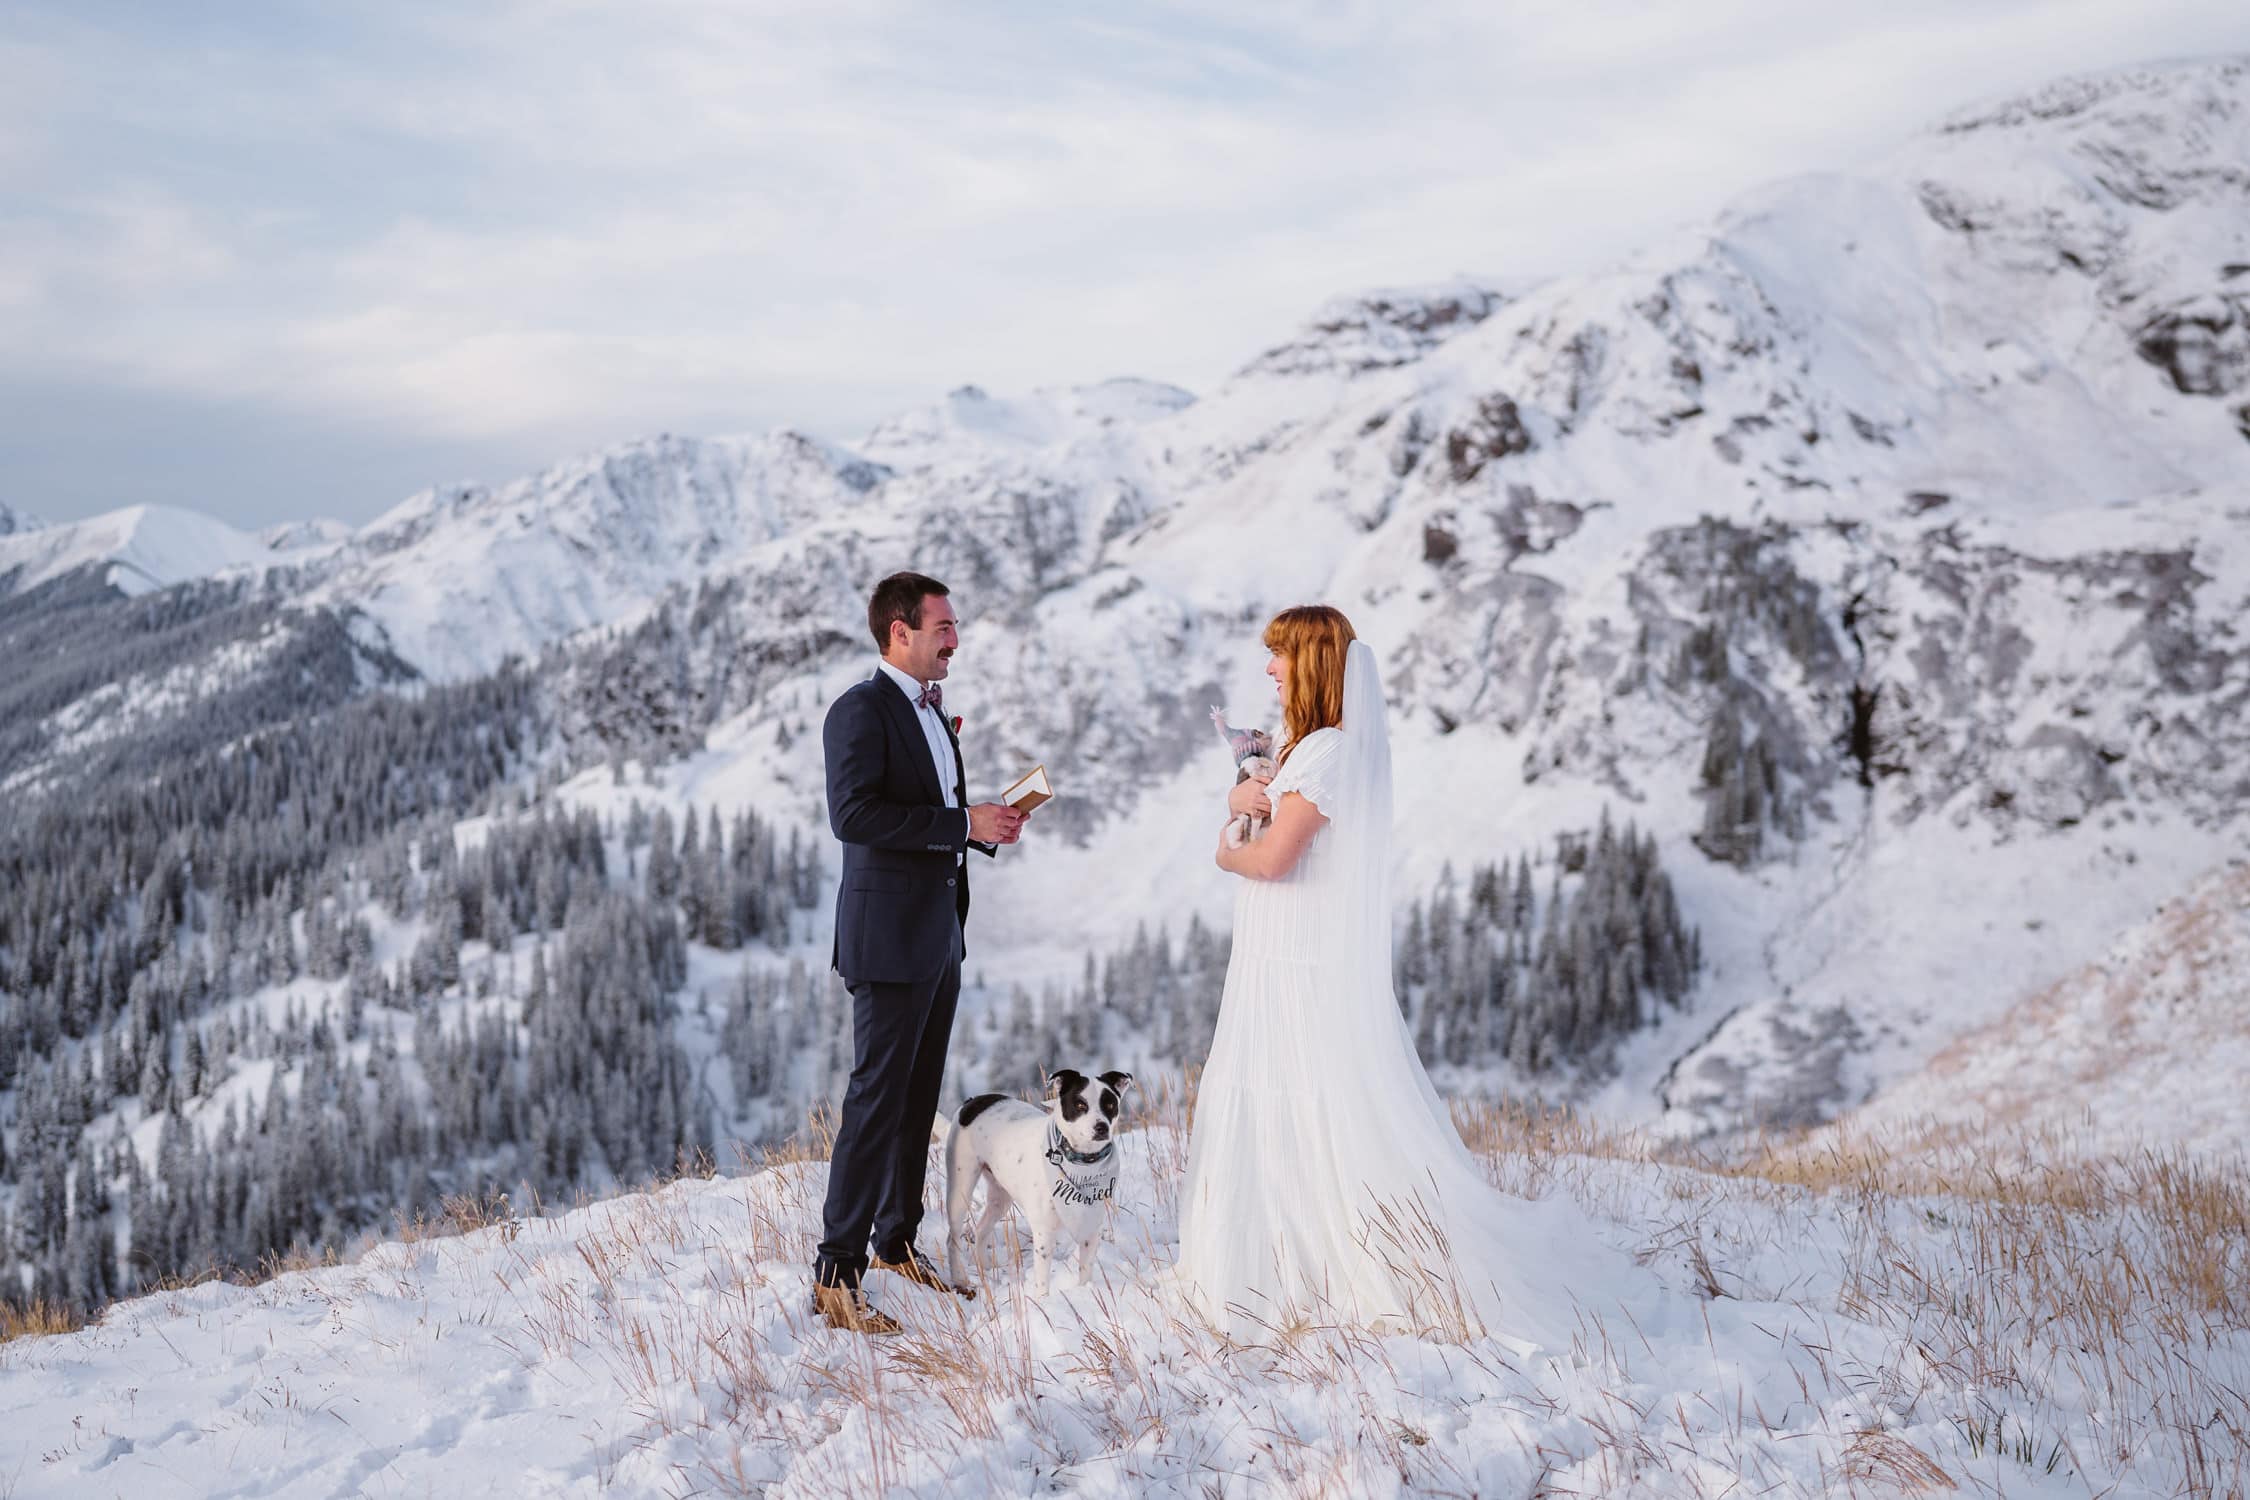 Bride and groom sharing their vows in the snow in Colorado for their elopement.